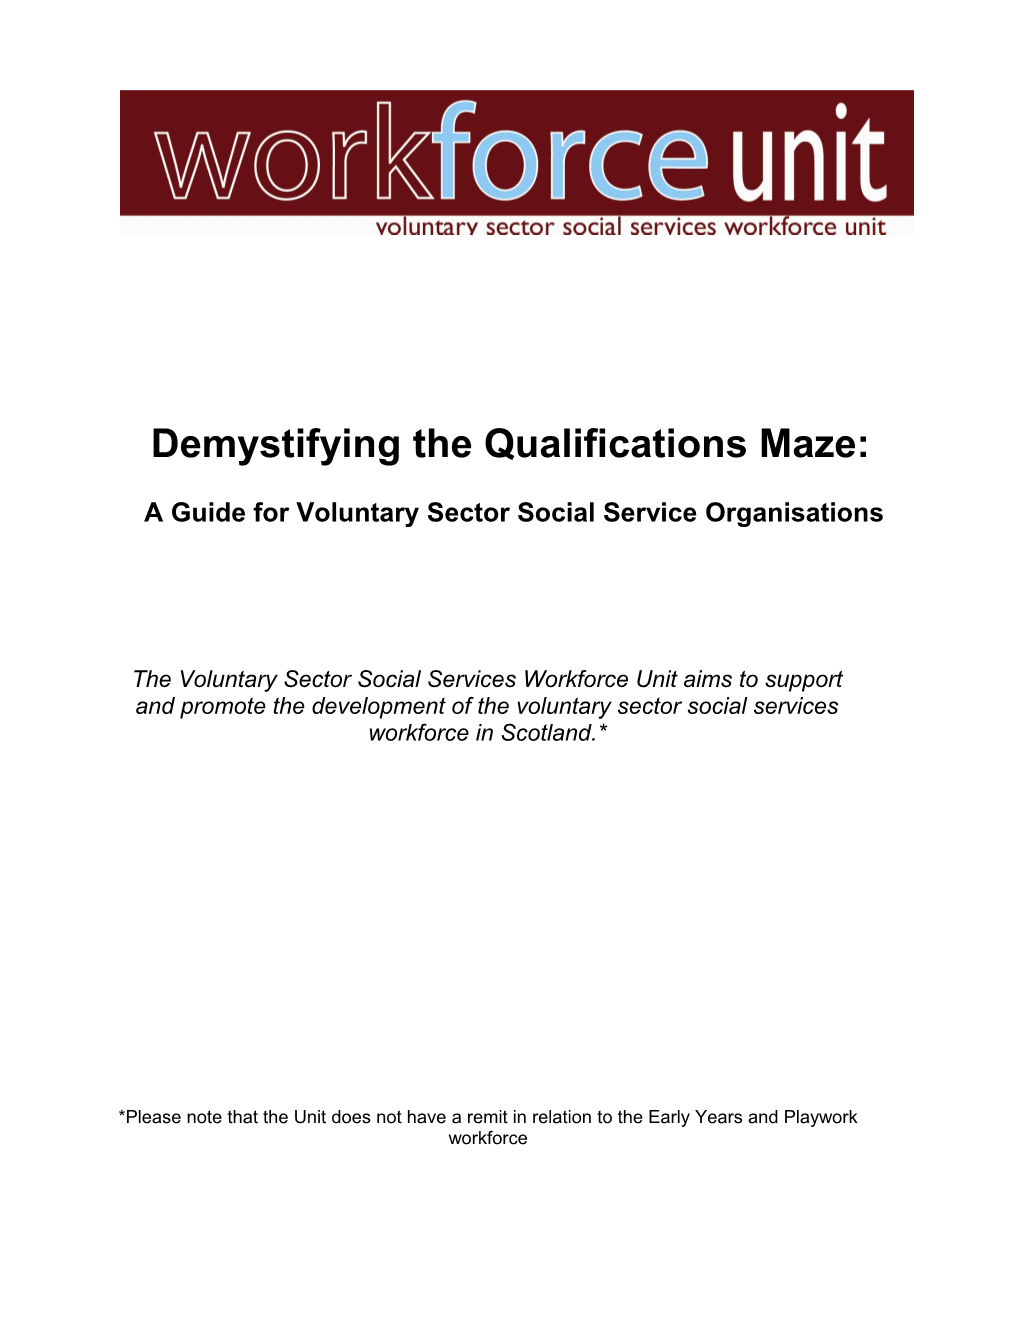 A Guide for Voluntary Sector Social Service Organisations